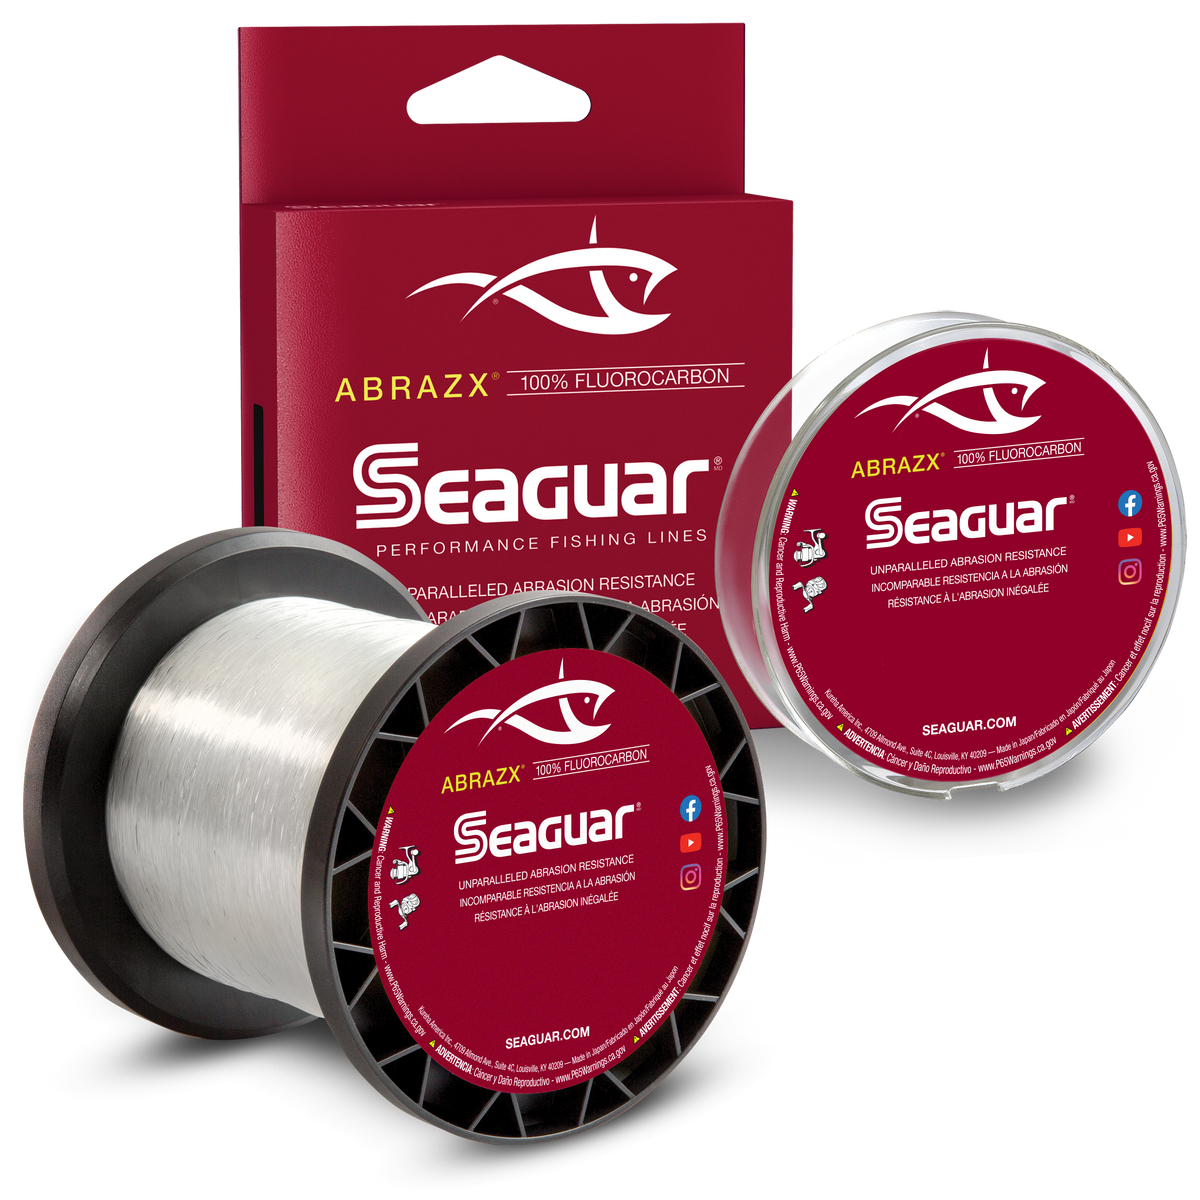 Seaguar AbrazX Fishing Line  Up to 64% Off Customer Rated Free Shipping  over $49!